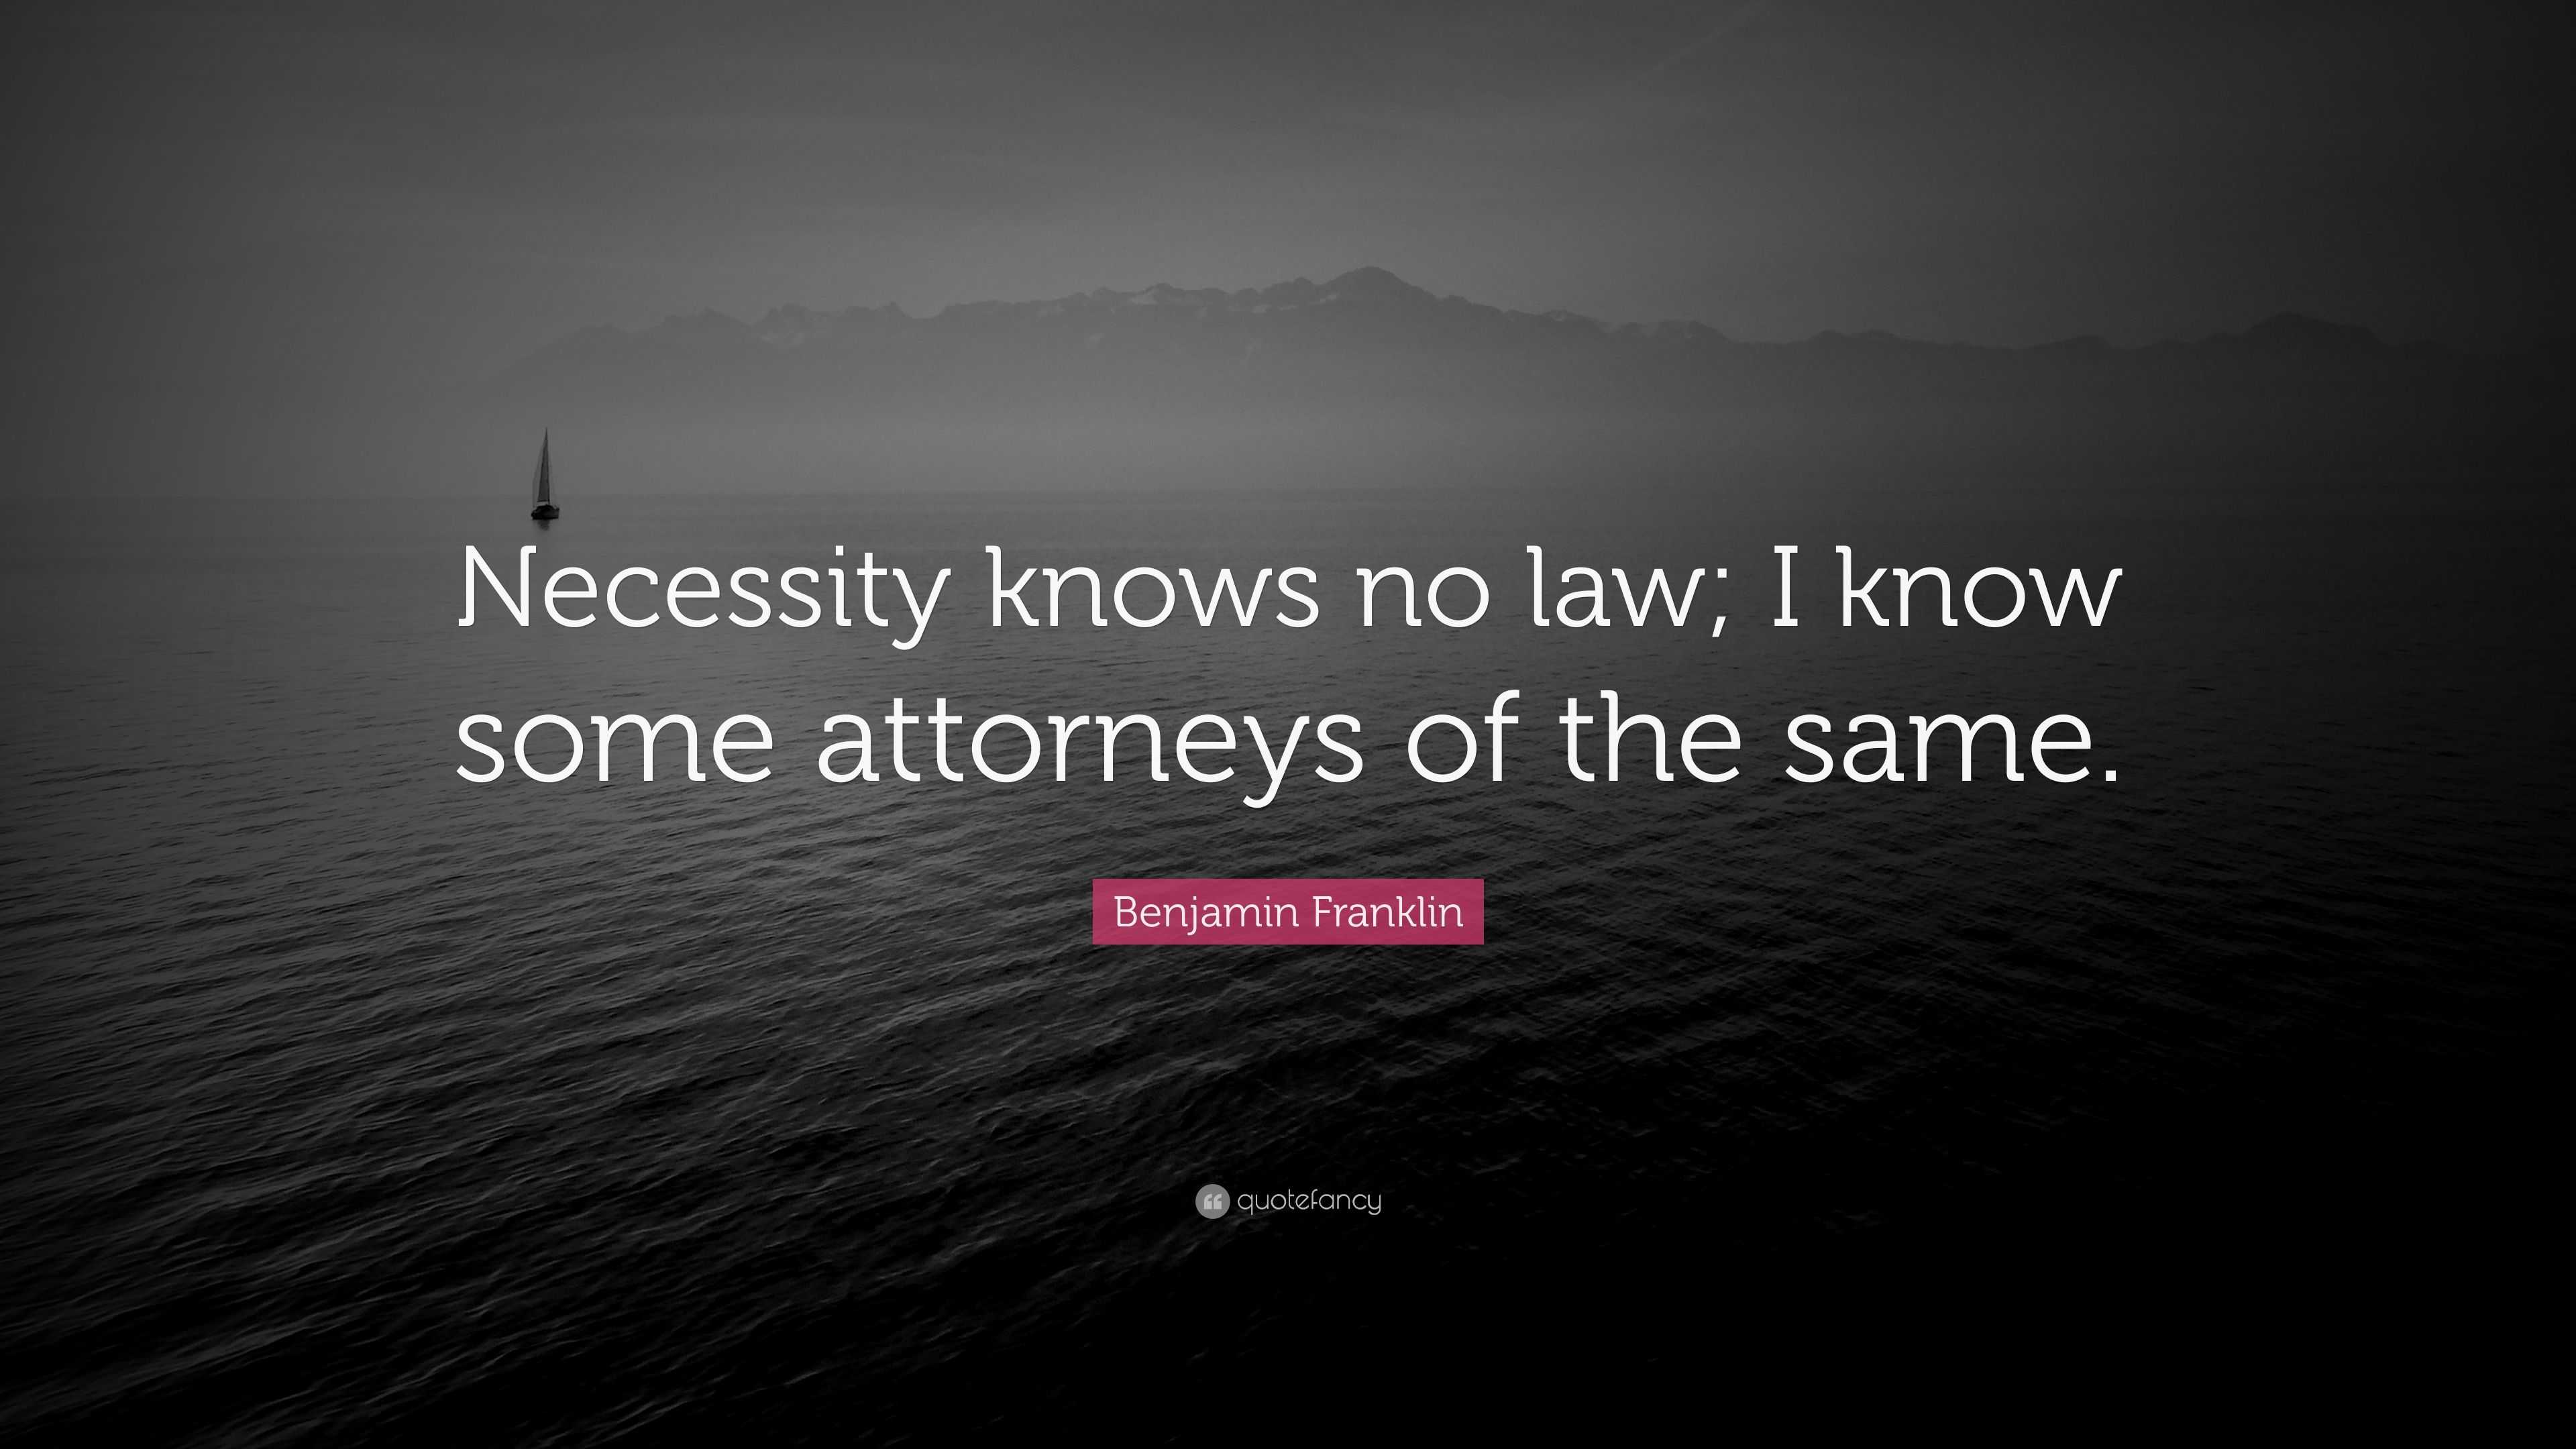 Benjamin Franklin Quote “necessity Knows No Law I Know Some Attorneys Of The Same” 7353